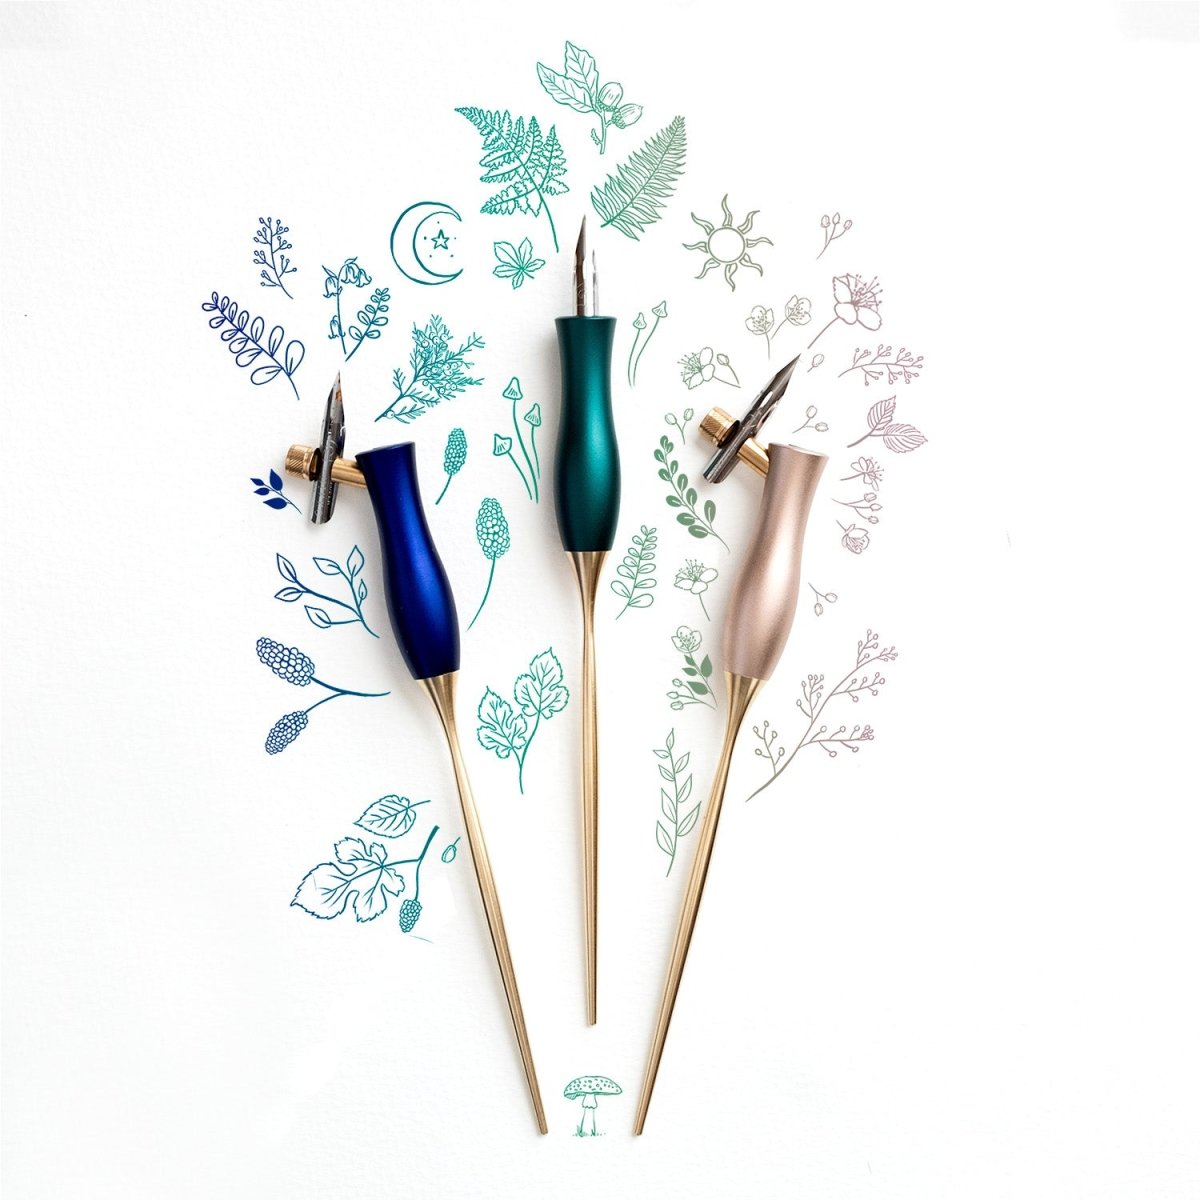 The Bloom luxury oblique calligraphy pen in three difference colours